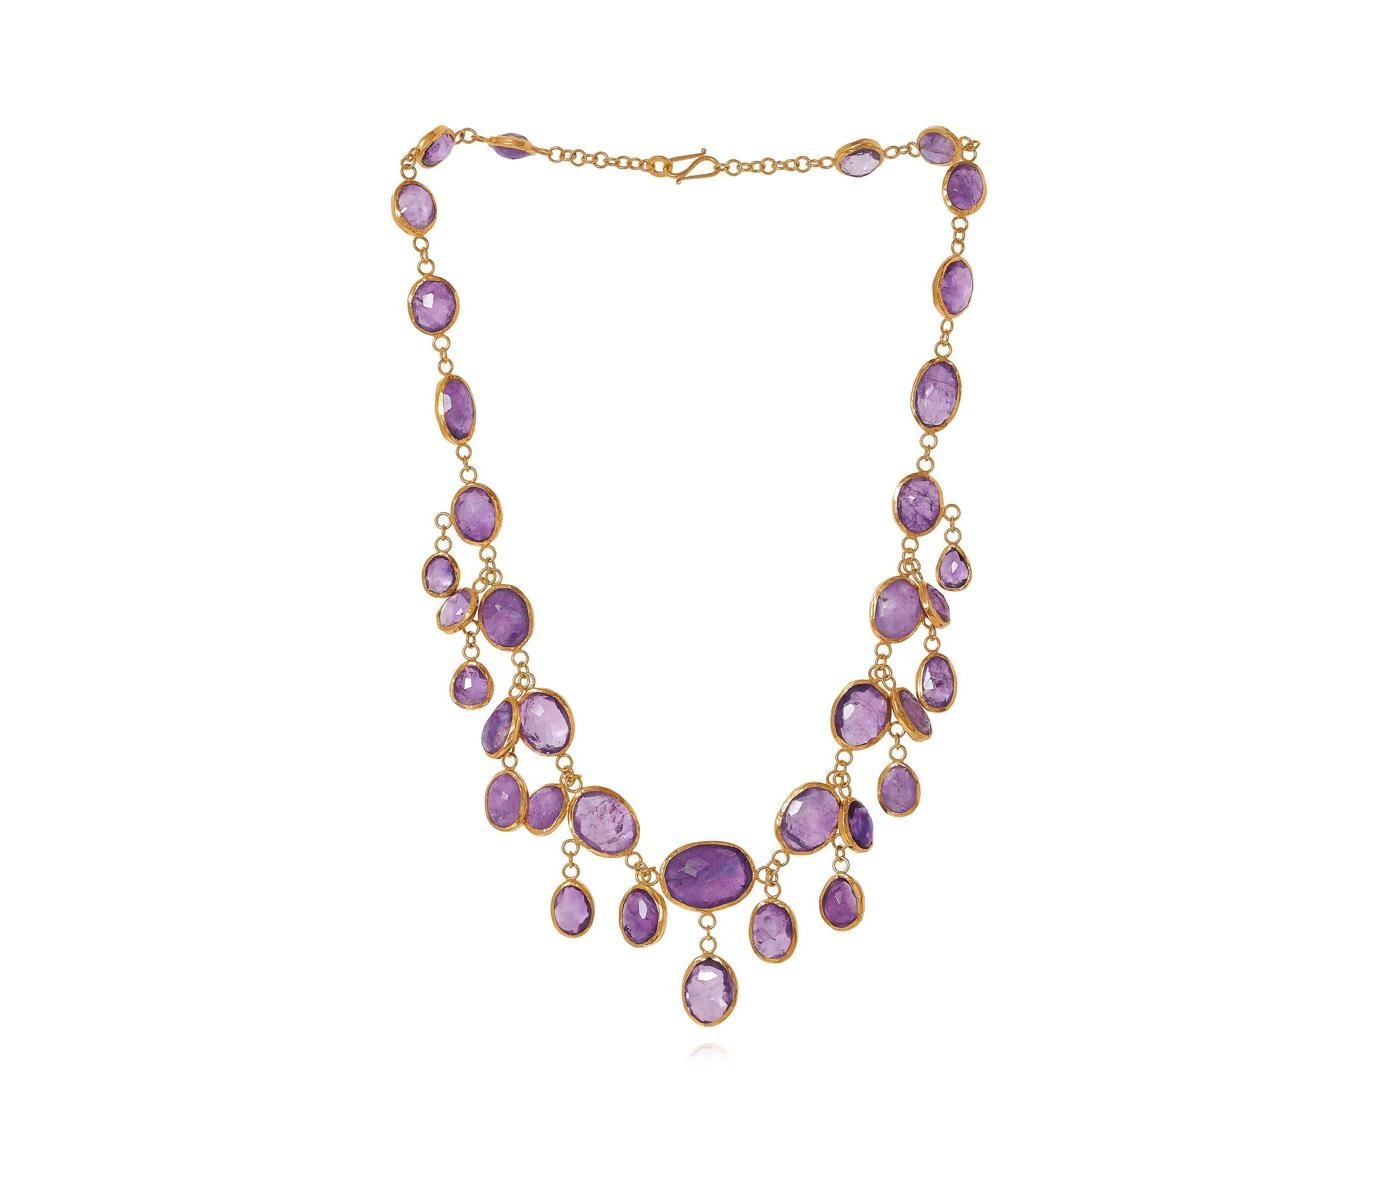 Necklace by Pippa Small